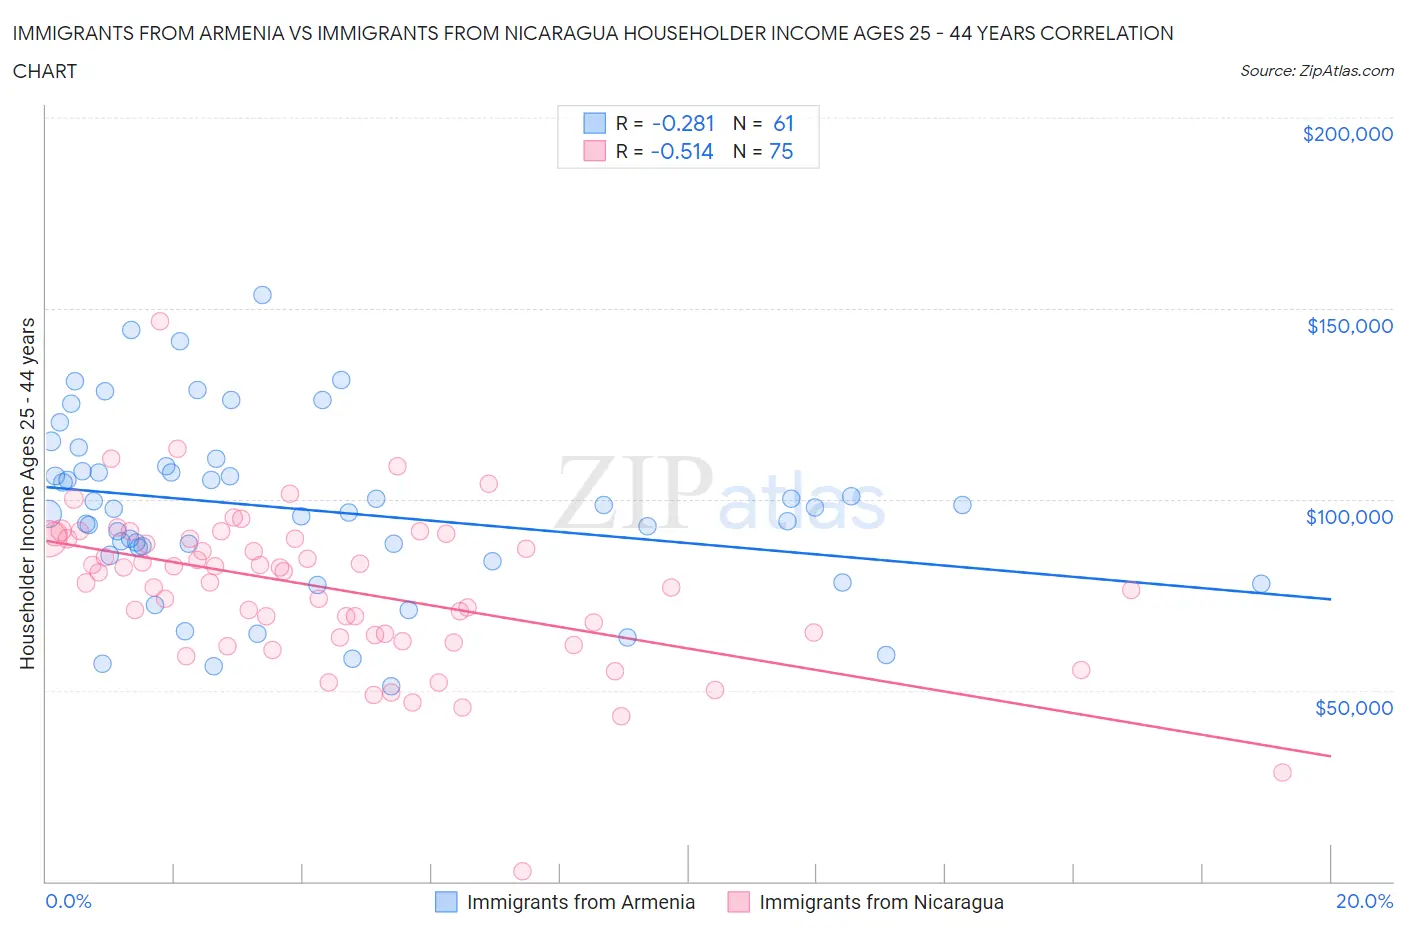 Immigrants from Armenia vs Immigrants from Nicaragua Householder Income Ages 25 - 44 years